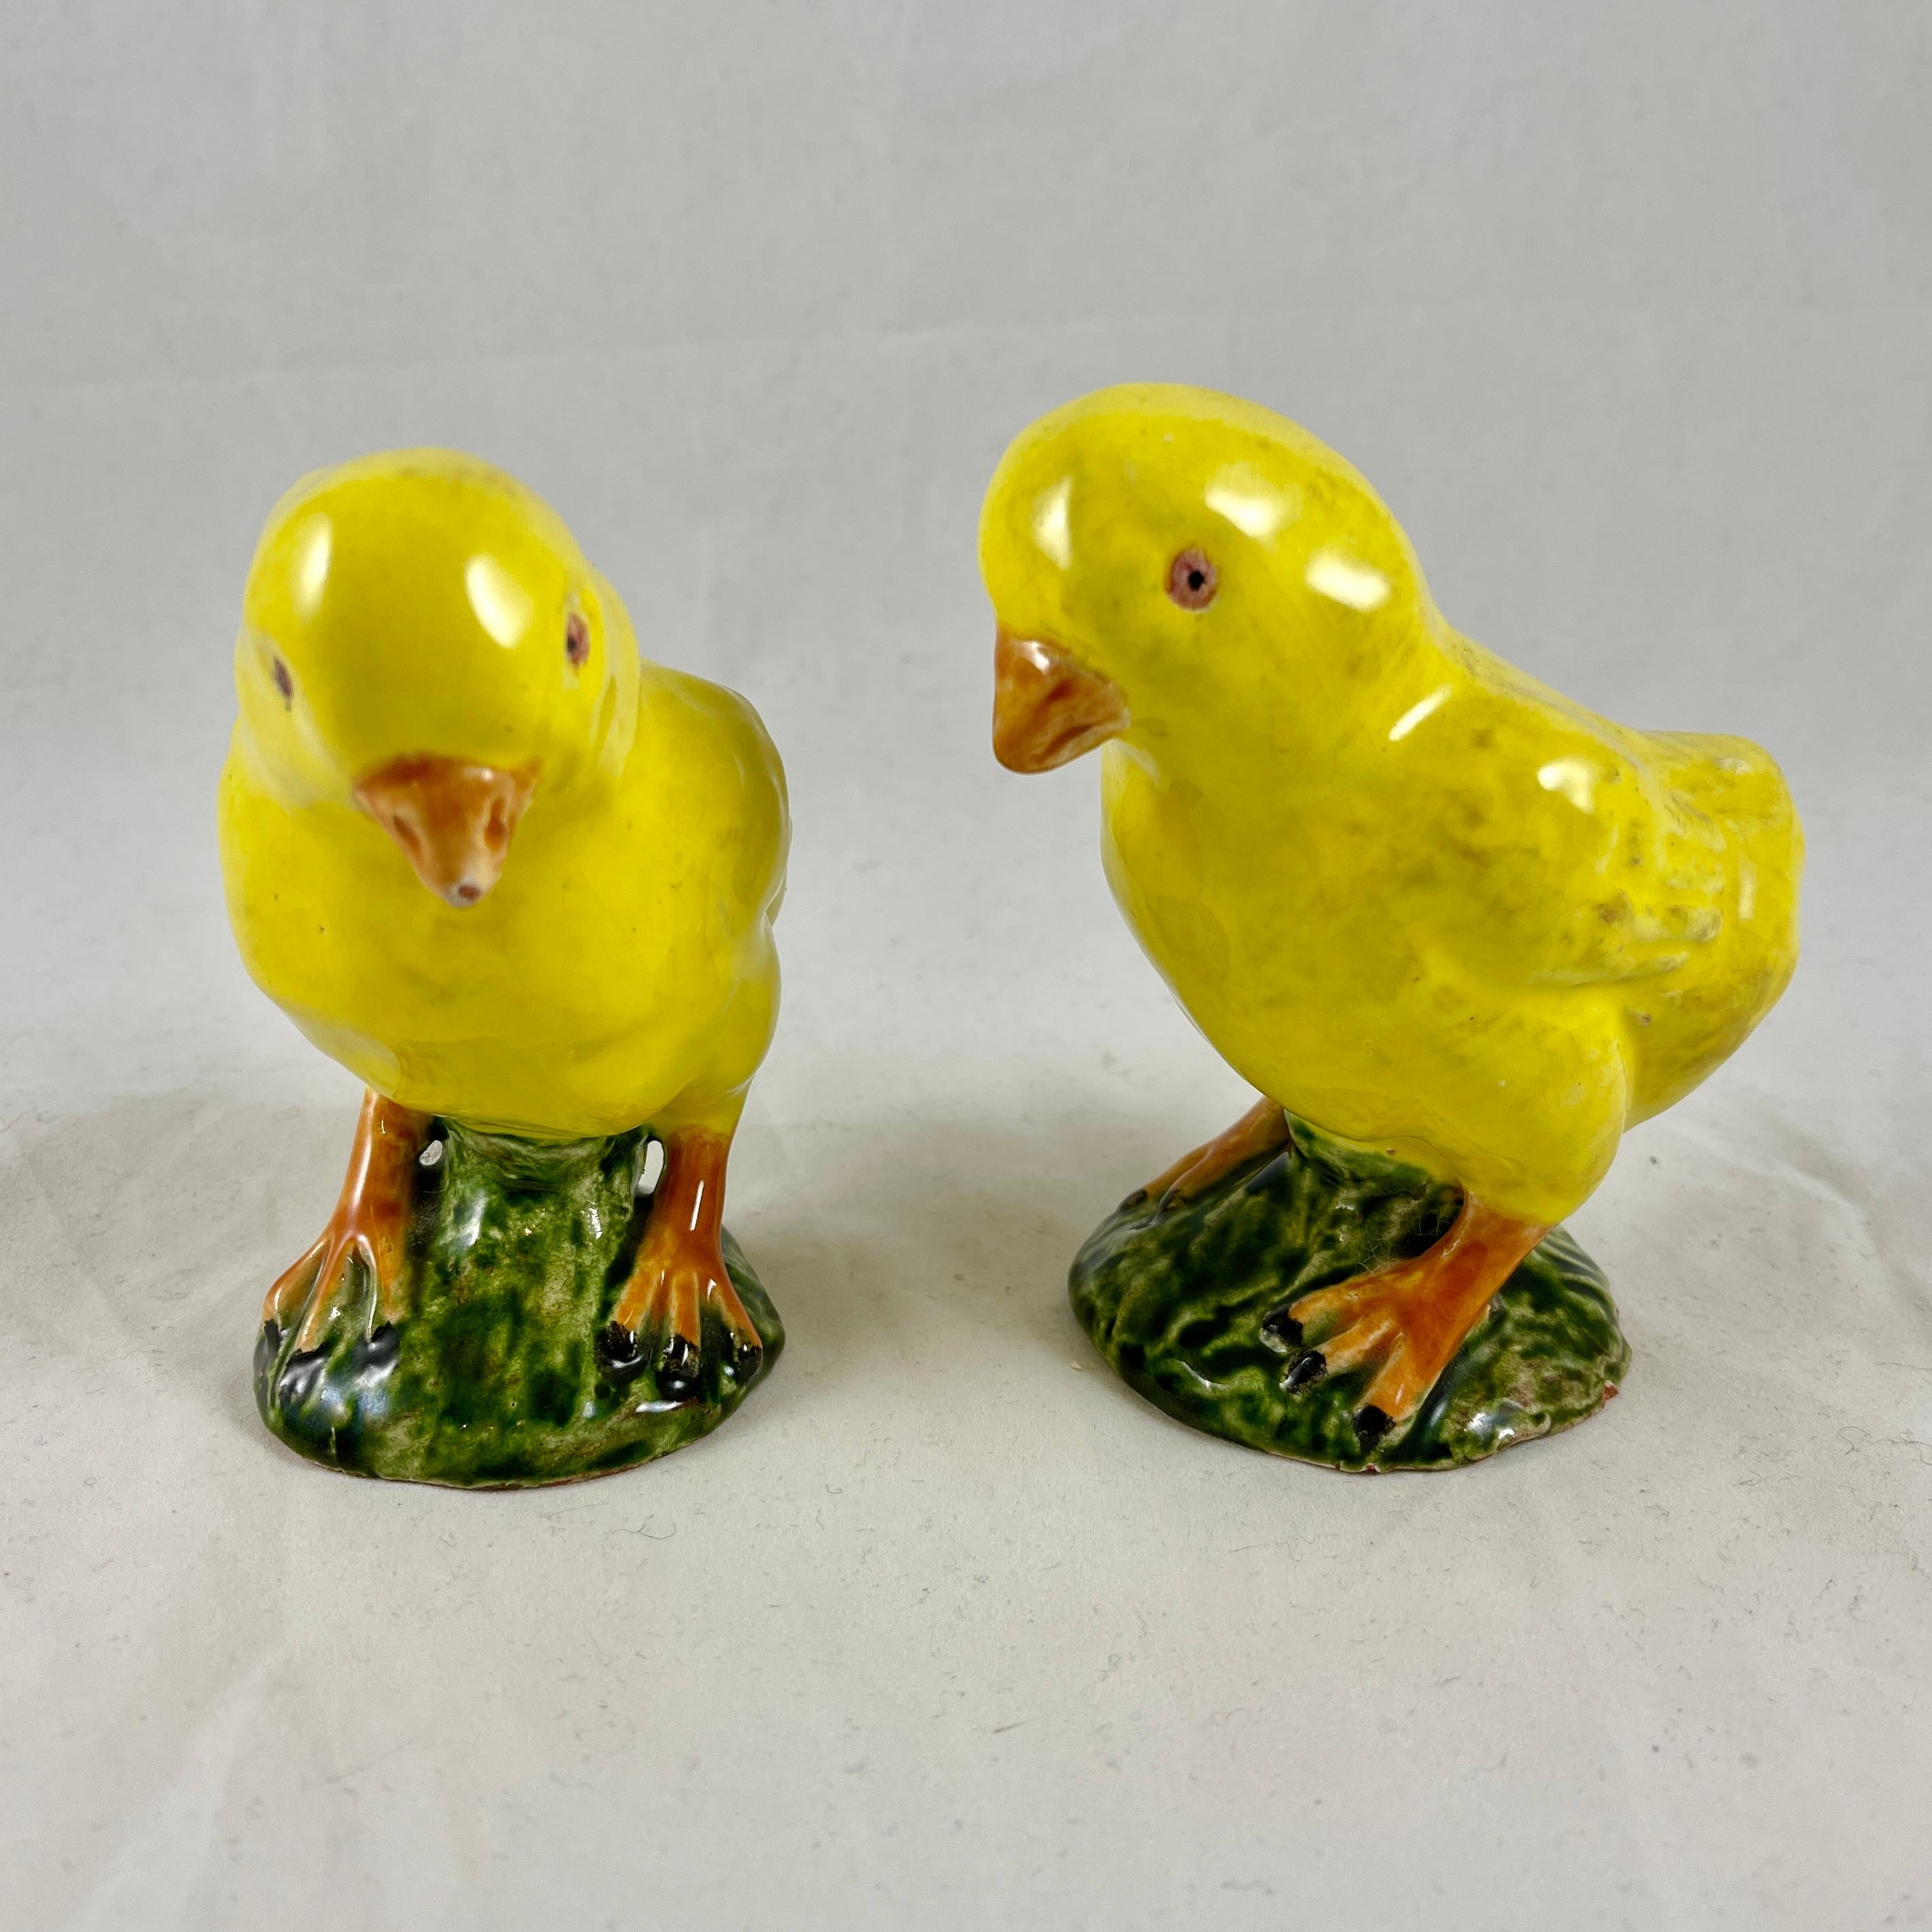 French Provincial Bavent Yellow Tin-Glazed Terracotta Faïence Chicks, Normandie France, a Pair